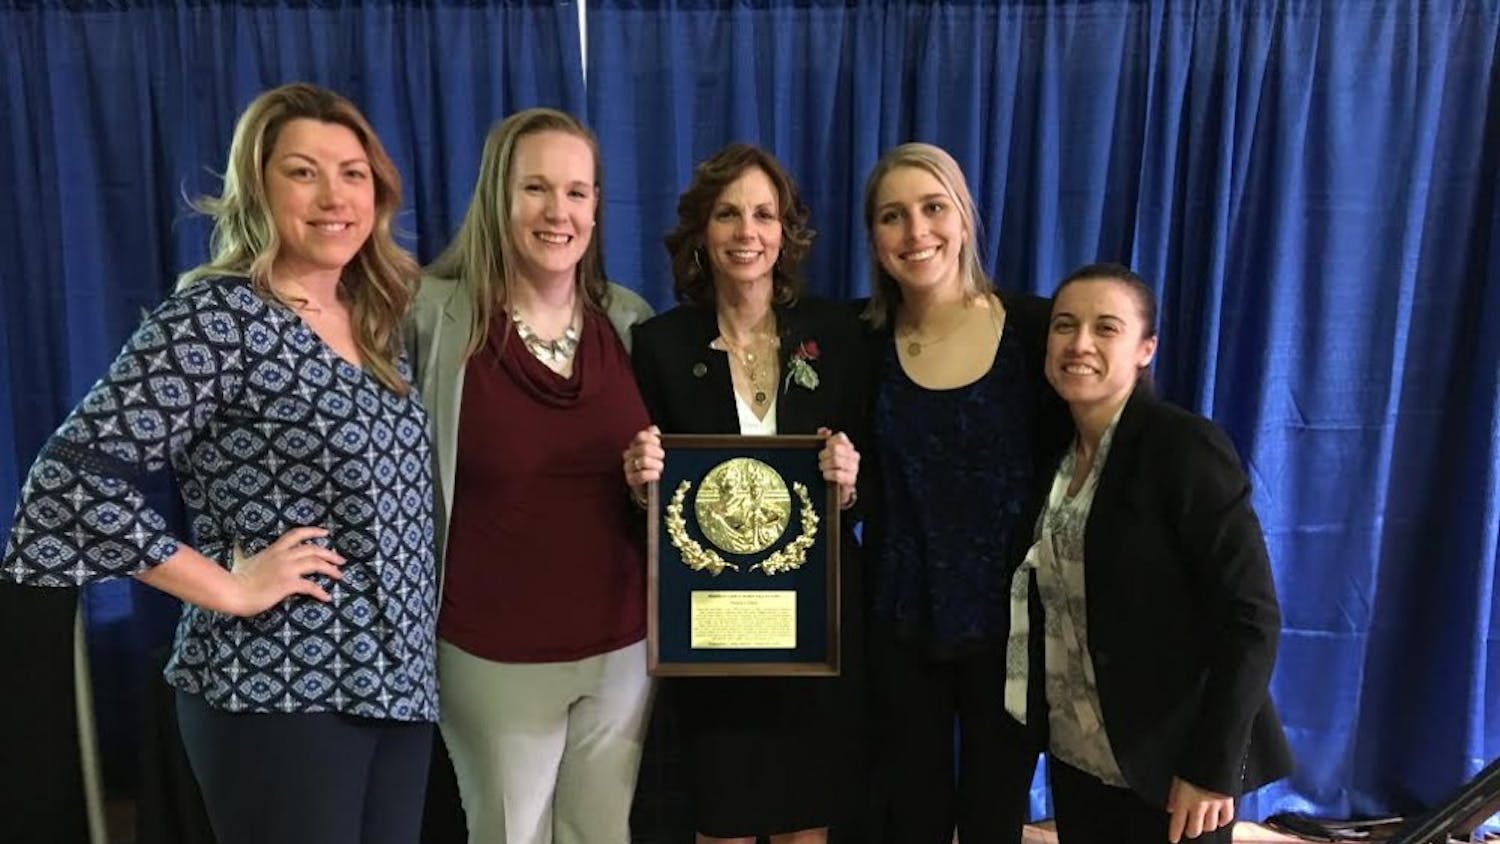 AU women's basketball head coach Megan Gebbia (center) with her plaque after being inducted into the Frederick County Sports Hall of Fame&nbsp;